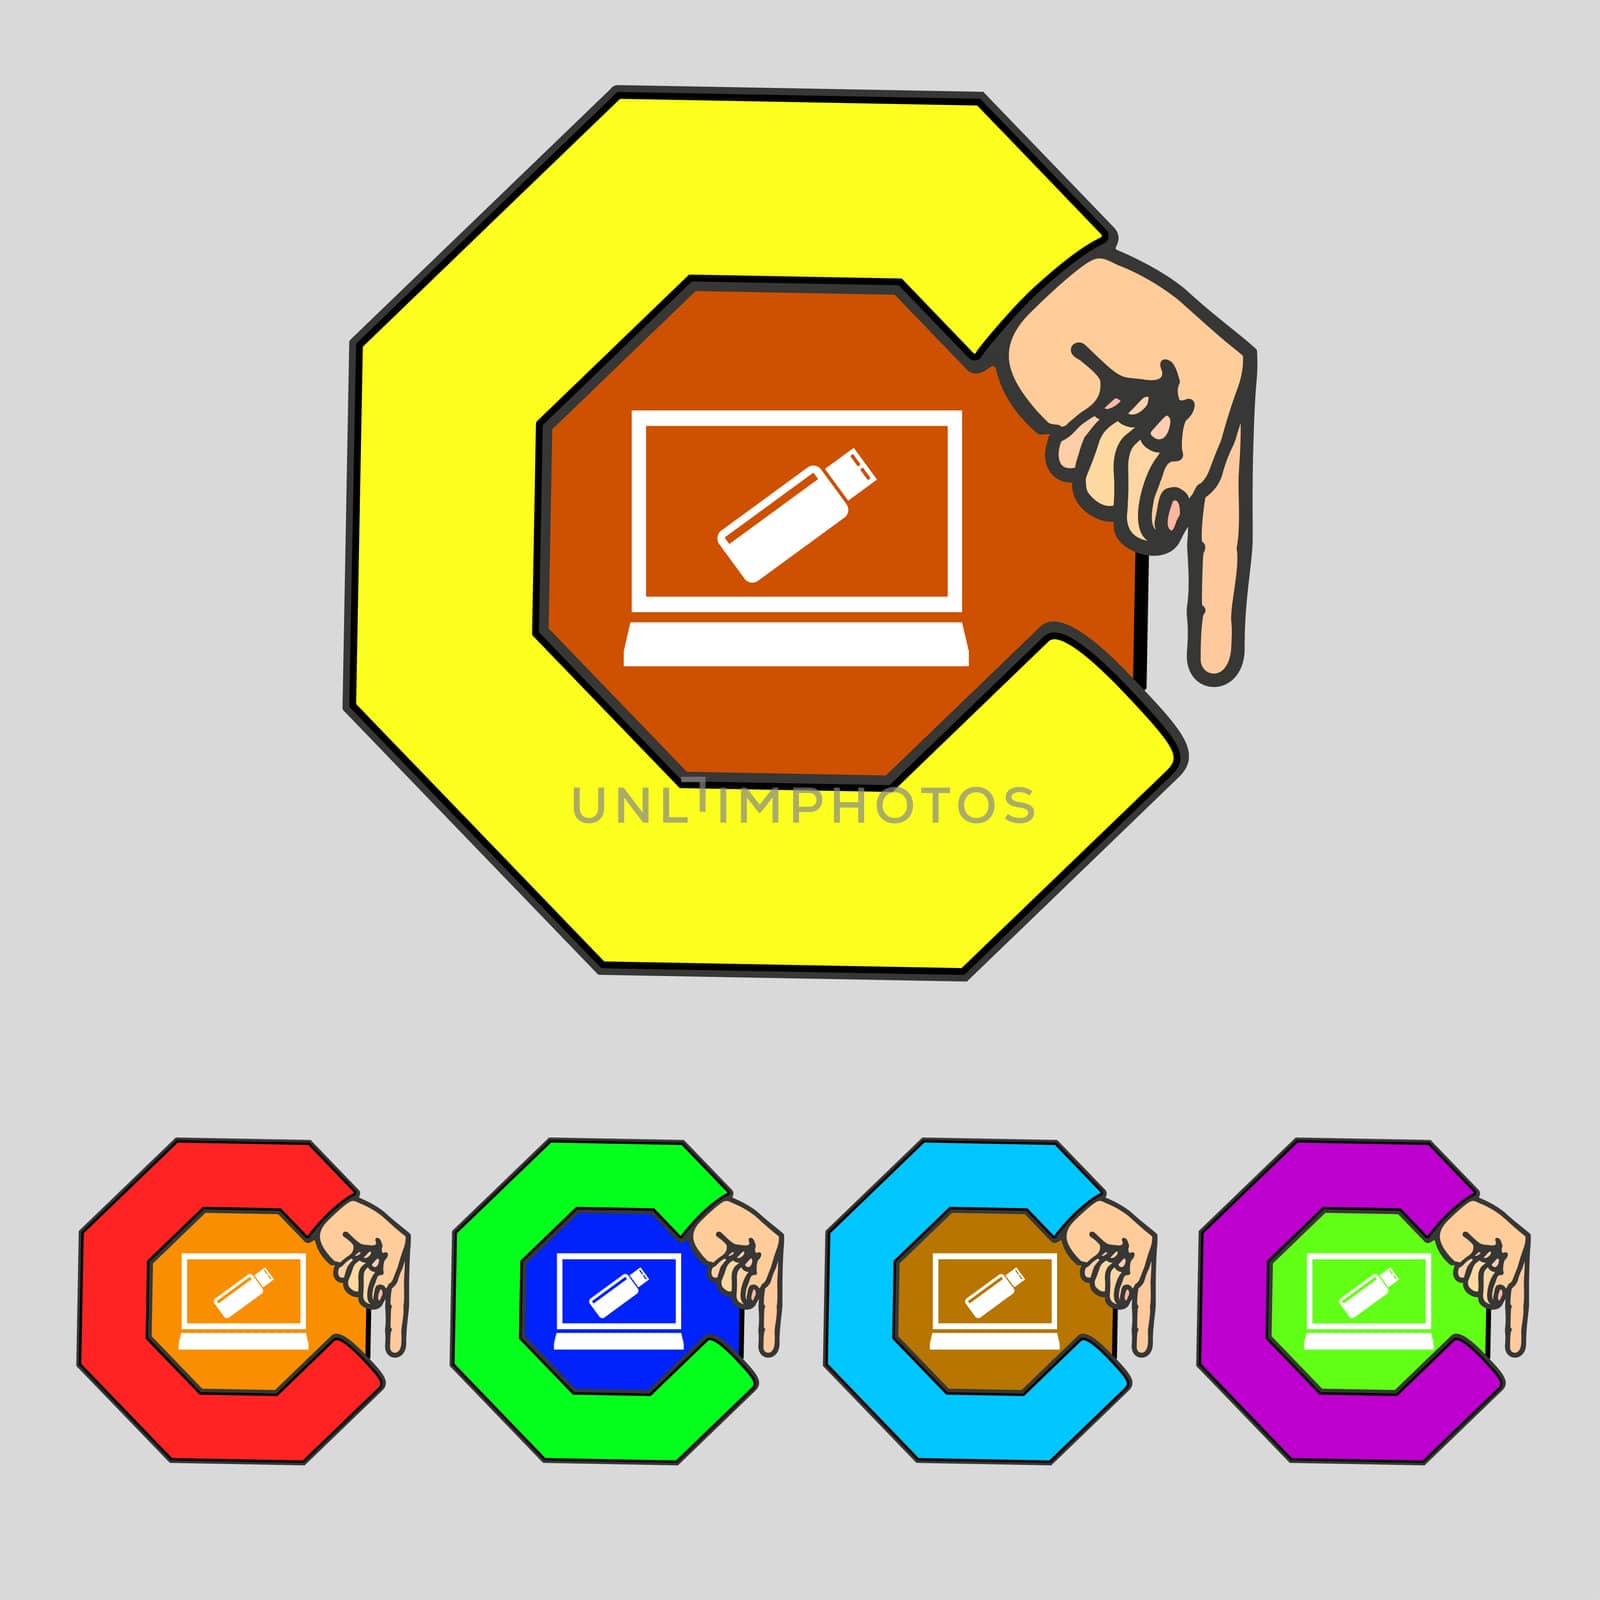 usb flash drive and monitor sign icon. Video game symbol. Set colourful buttons. illustration